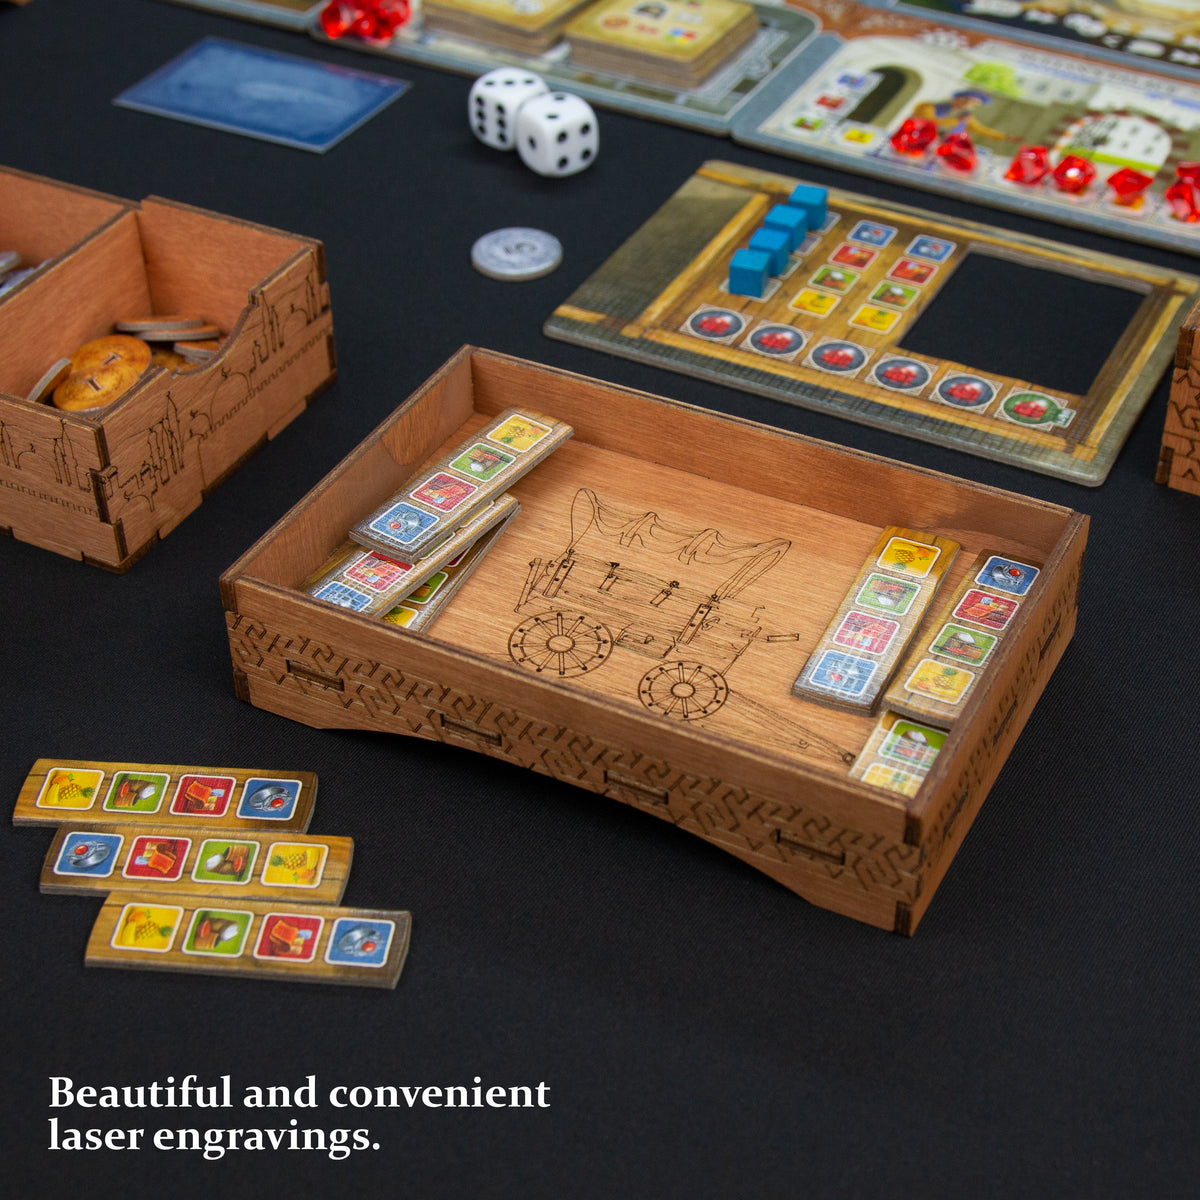 Organizer for Istanbul: Big Box - The Dicetroyers